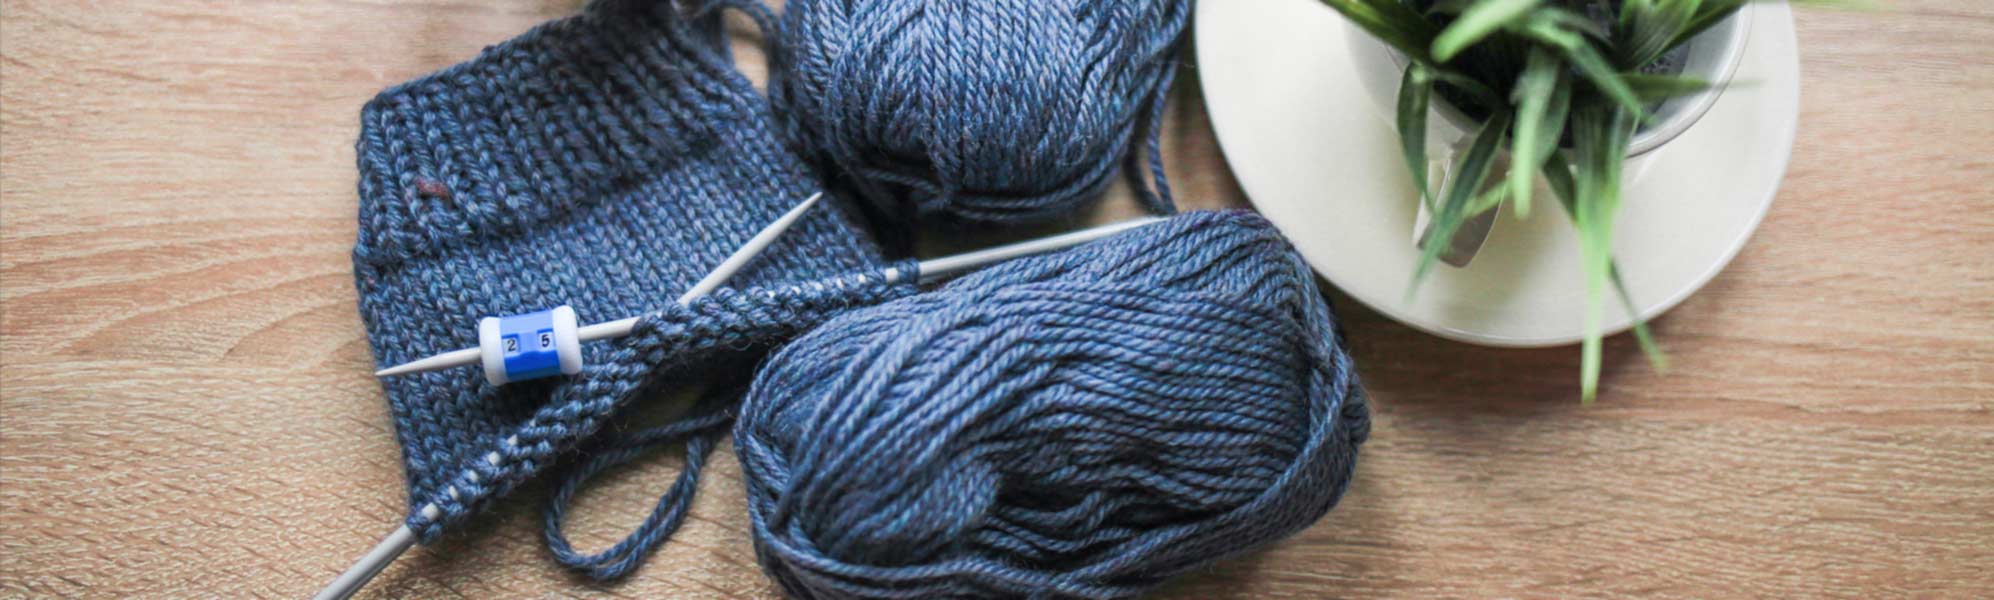 What Are The Best Circular Knitting Needles? 